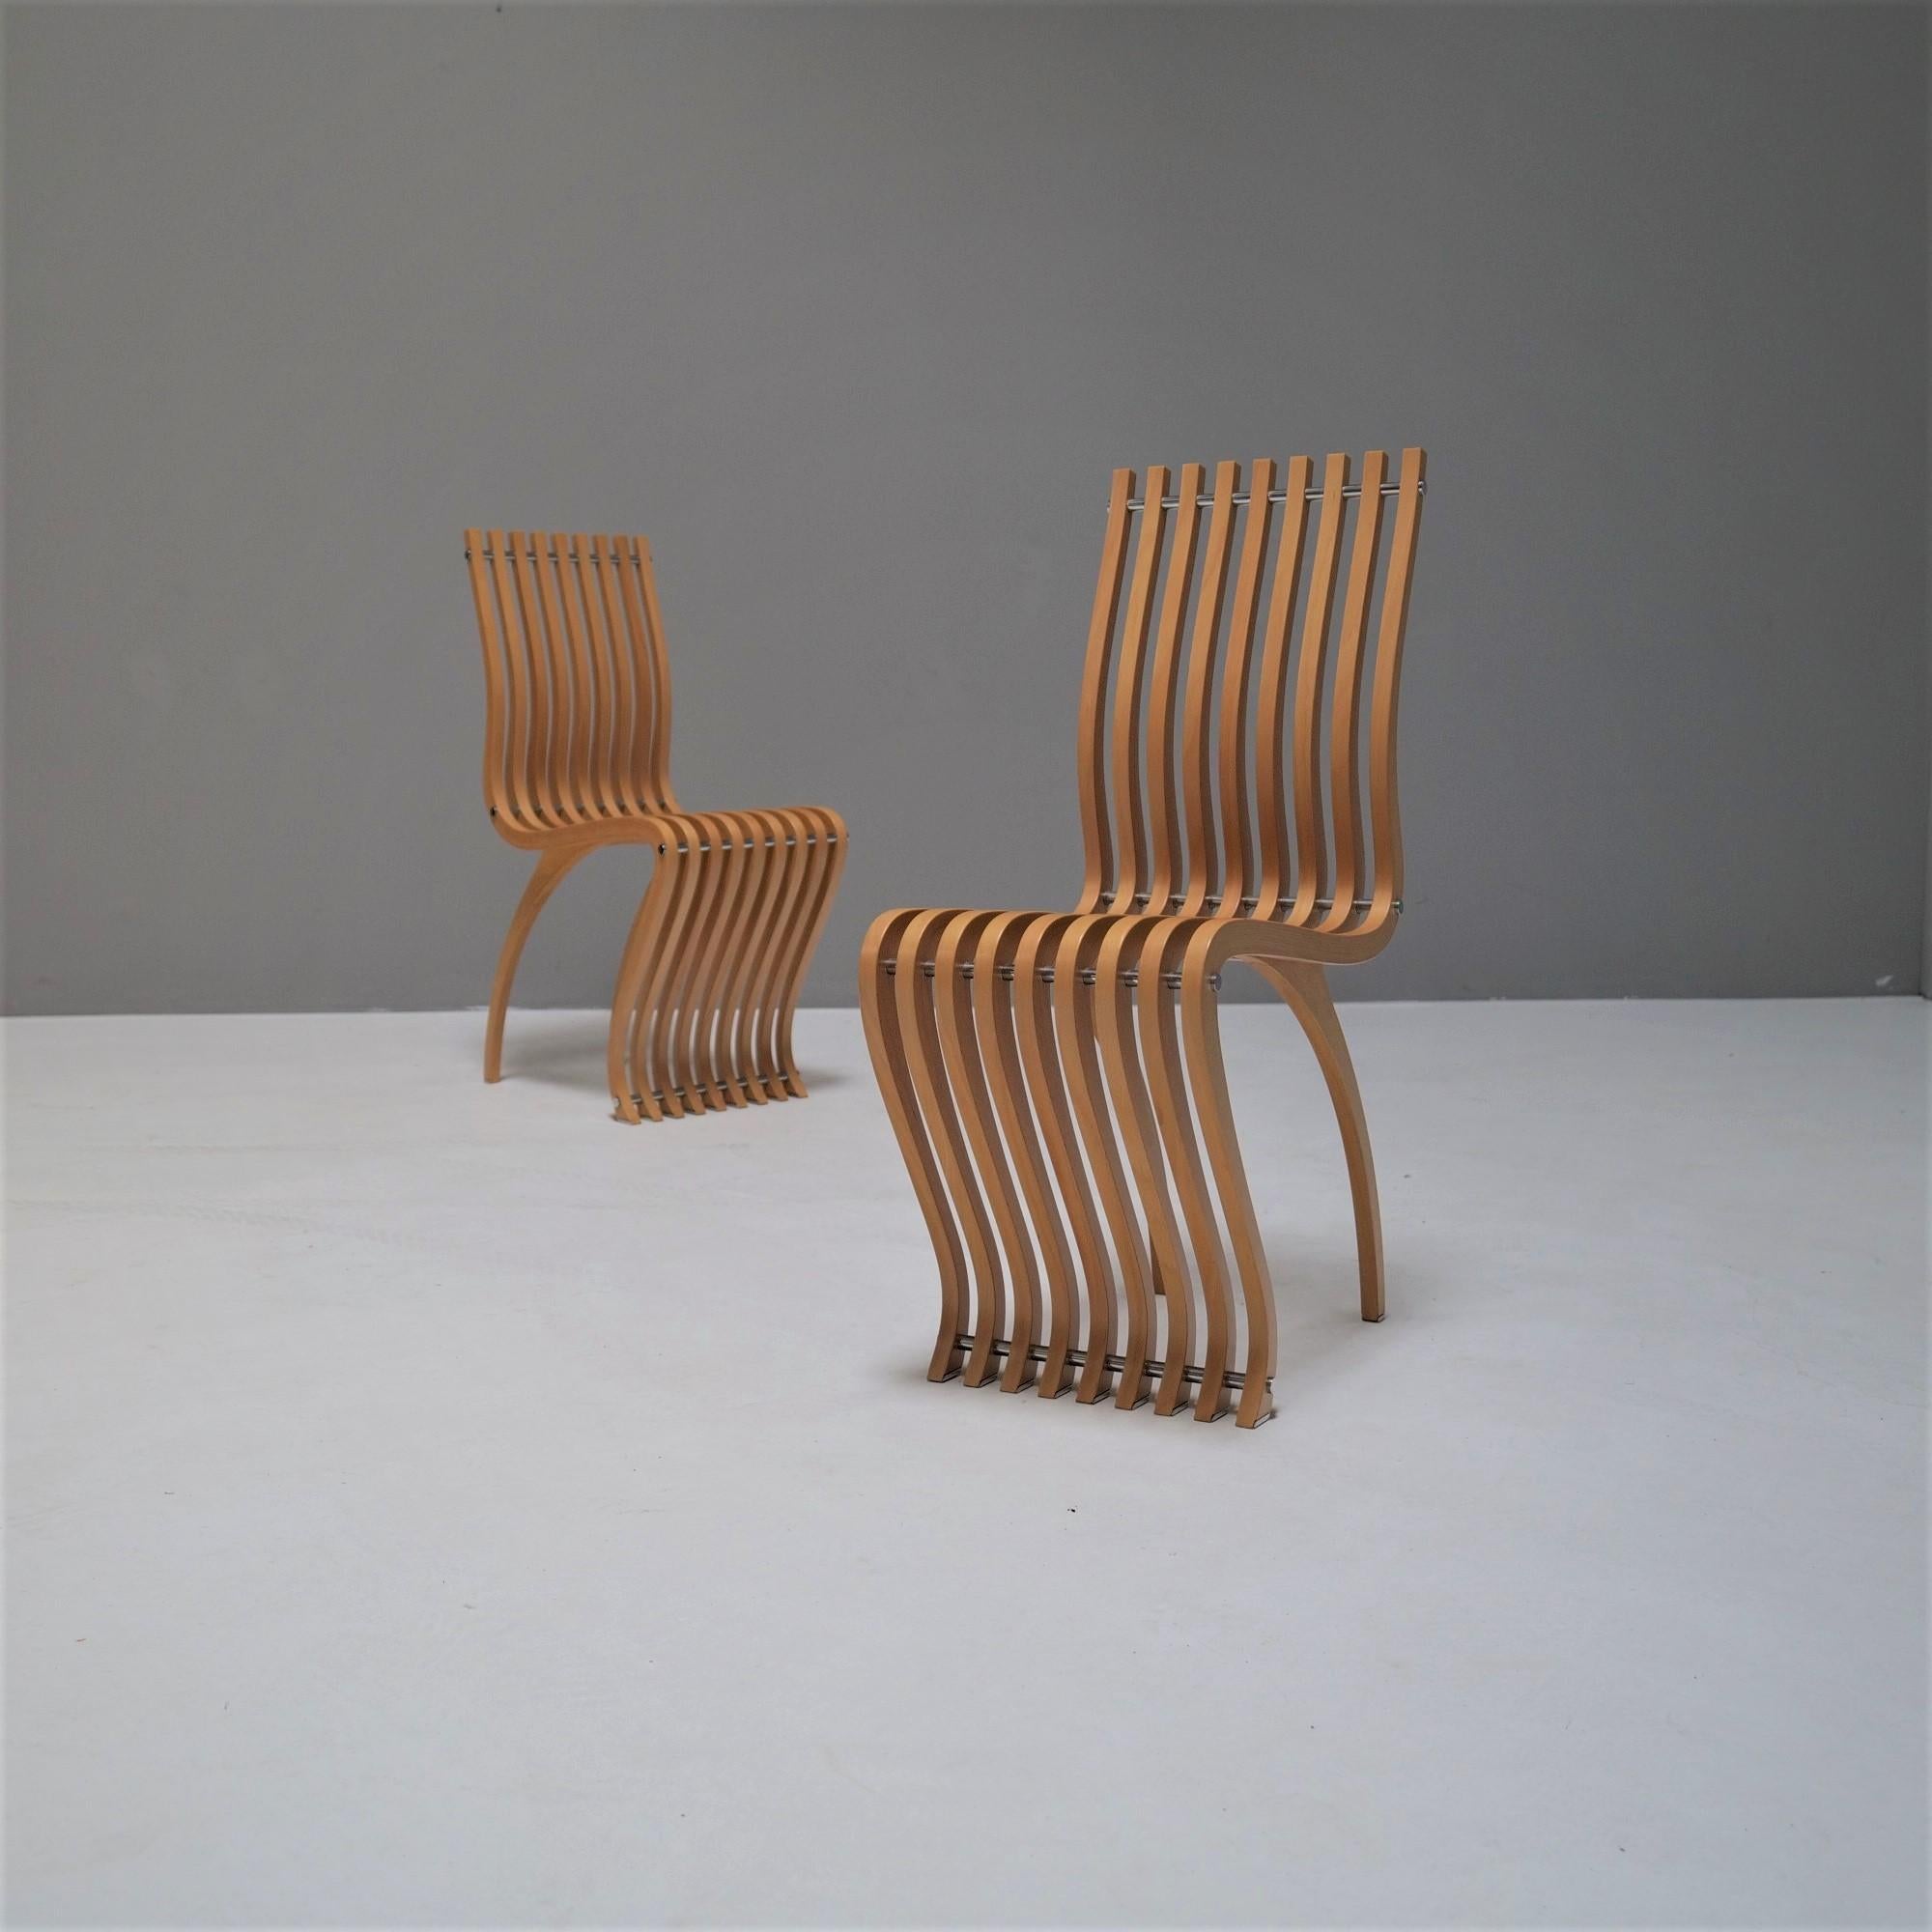 Metal Ron Arad, a Pair of Dining Chairs Mod. Schizzo, 1989